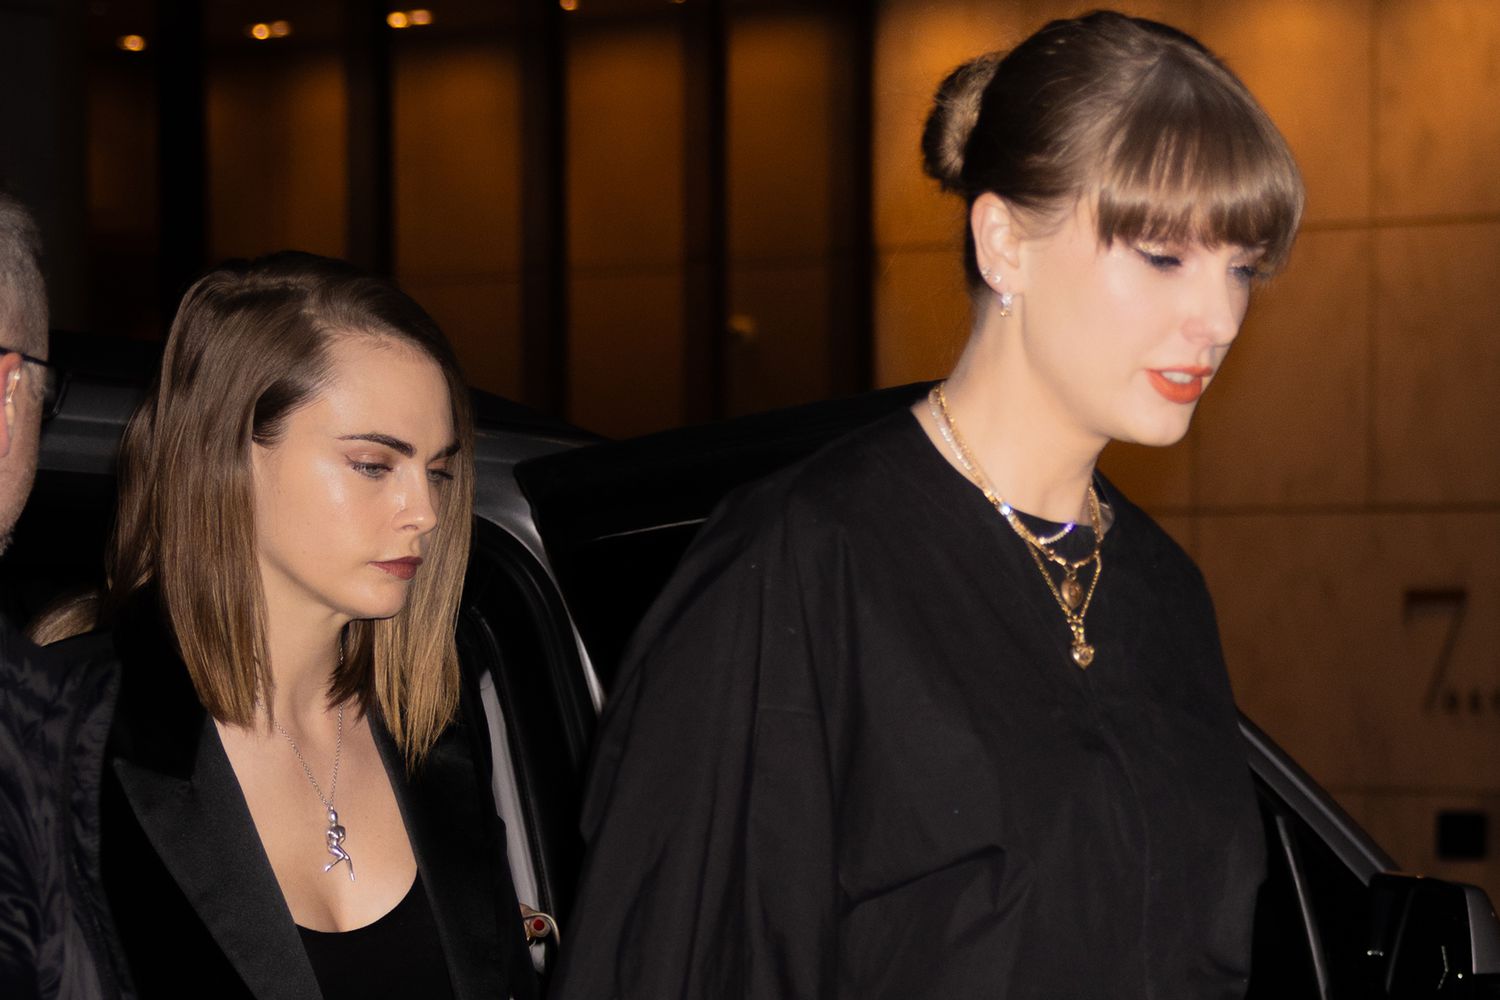 Taylor Swift, Brittany Mahomes & Cara Delevingne Enjoy Girls’ Night Out In NYC